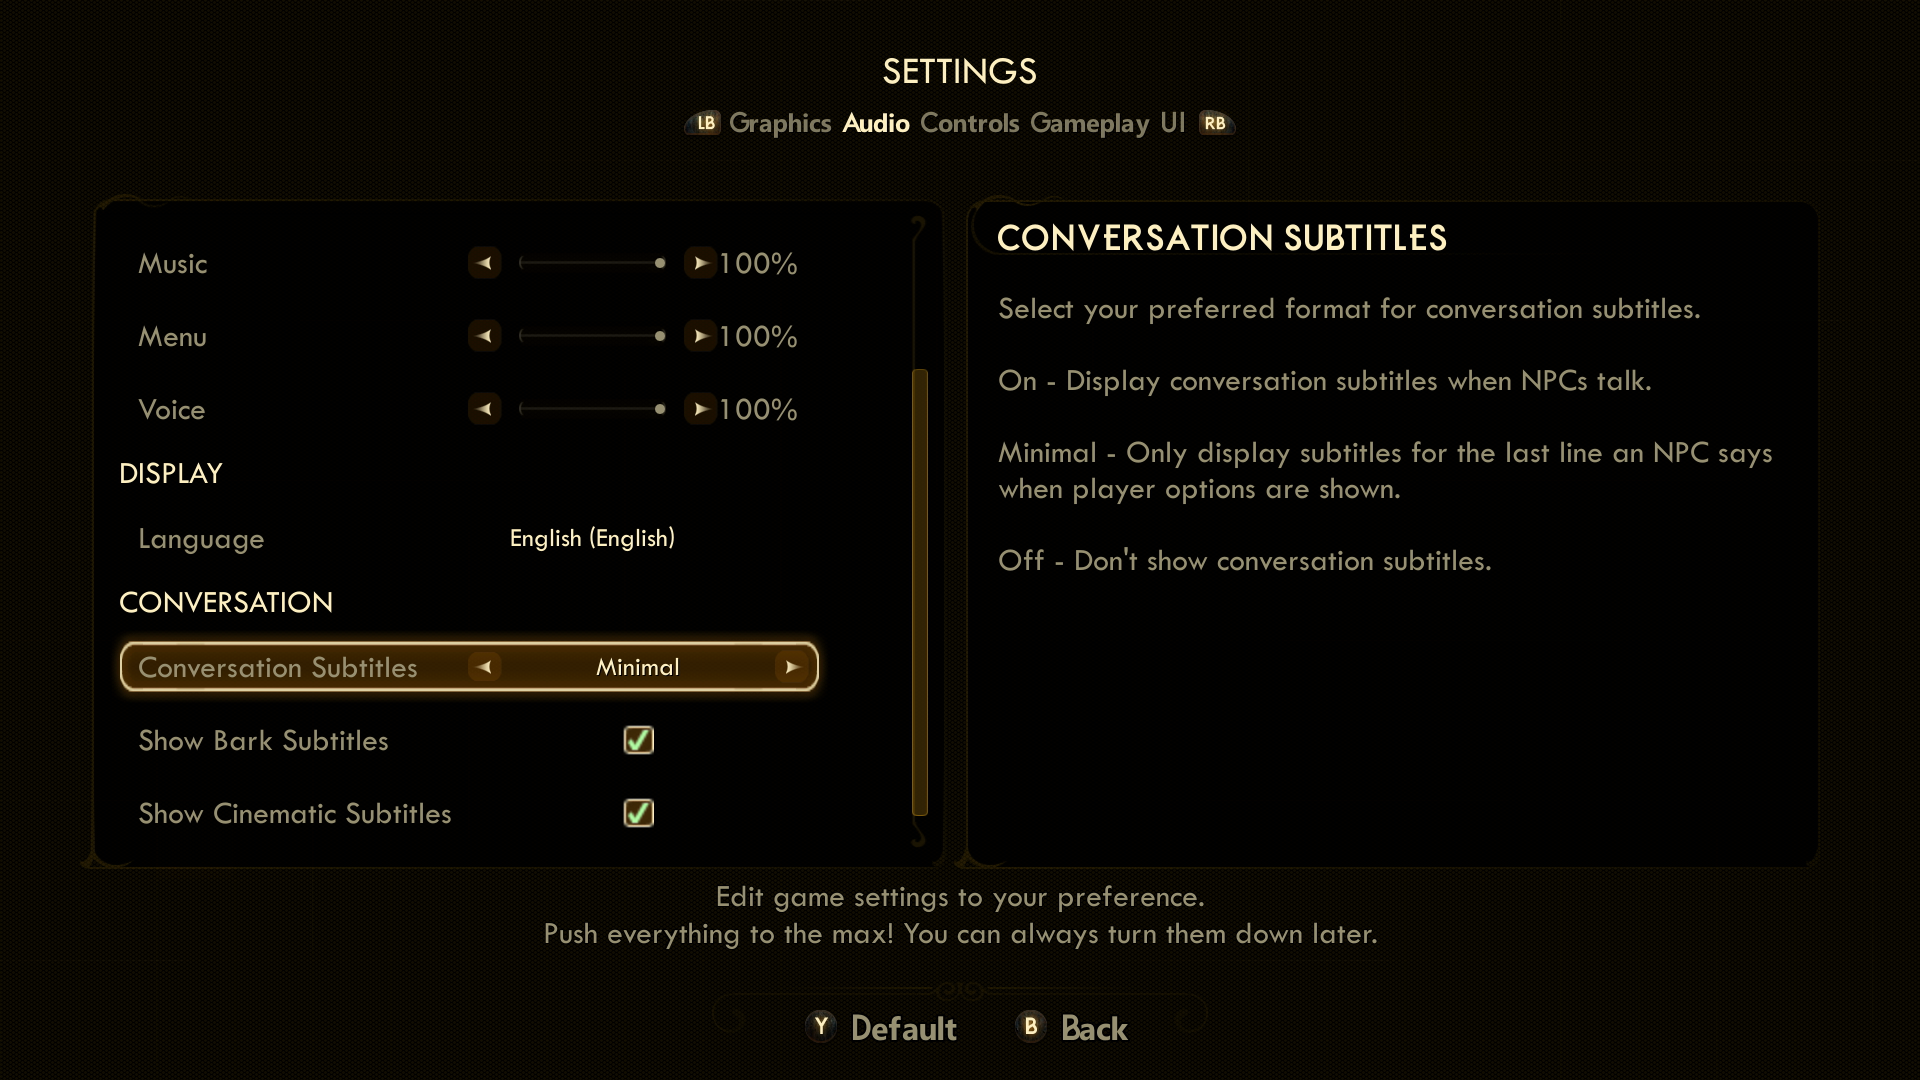 The audio settings menu for The Outer Worlds. Under the conversation category, the player is focused on the first option, conversation subtitles, which is set to minimal. On the right side of the screen, there's an explanation of the three options: on, minimal, and off. On displays subtitles when an NPC talks. Minimal only displays subtitles for the last line that an NPC says when player options are shown. Off doesn't show subtitles for conversations. Below the conversation subtitles option are toggles to turn Bark Subtitles and Cinematic Subtitles on or off.